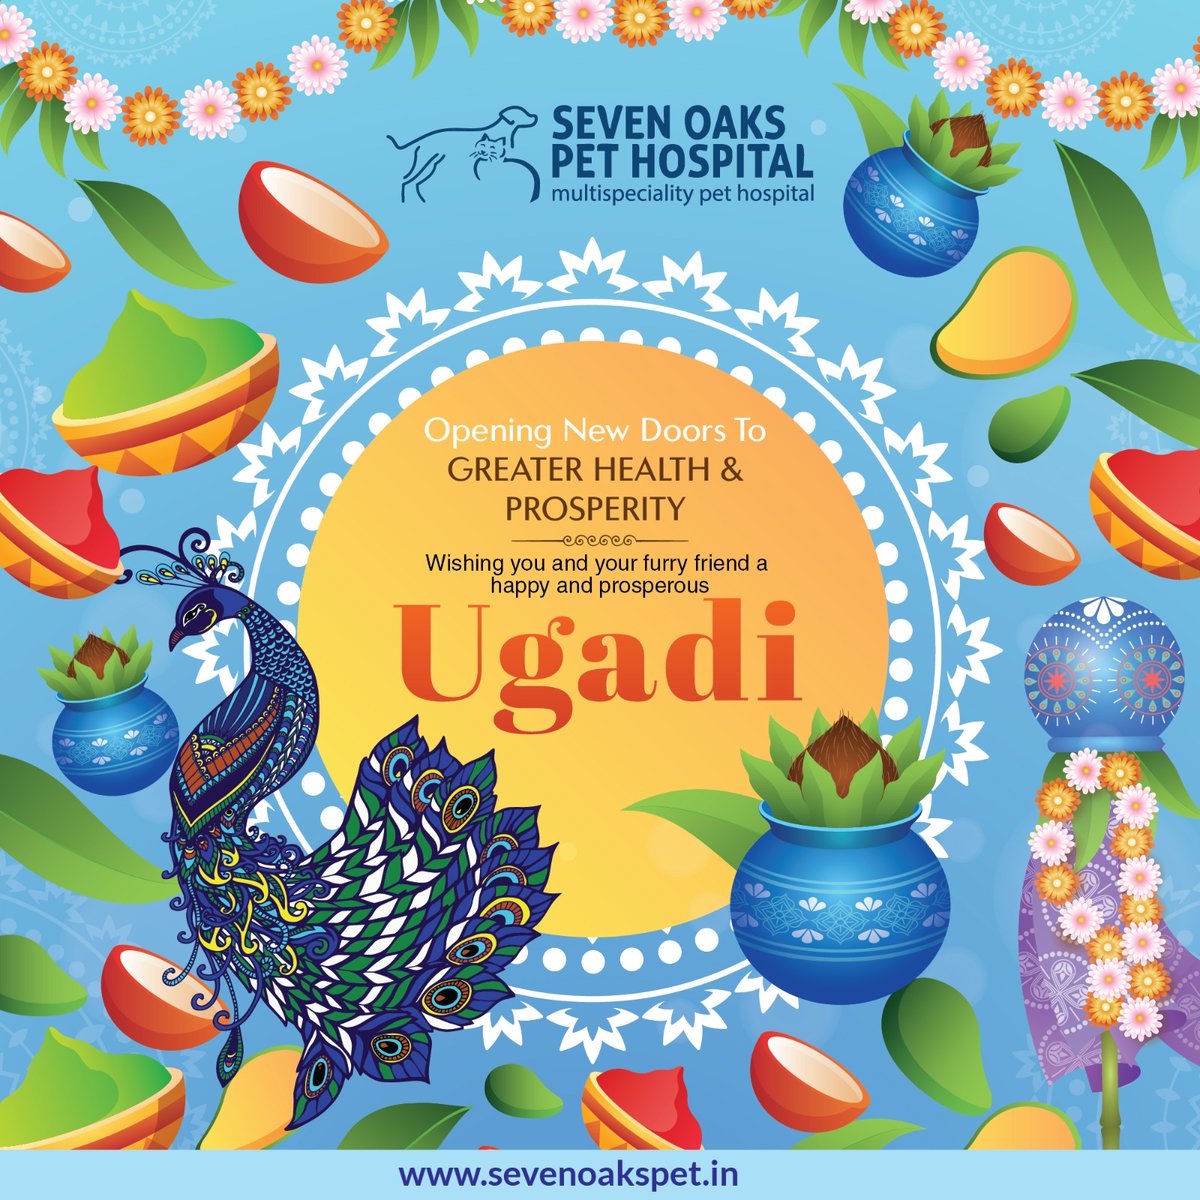 Happy Ugadi from Seven Oaks Pet Hospital! Wishing you and your furry friend a year filled with health, happiness, and prosperity. 

#UgadiGreetings #Ugadi 
#SevenOaksPetHospital  #vetvisionary  #veterinaryhospital 
 #veterinaryclinic #pethospital #petclinic #pethealth  #petcare